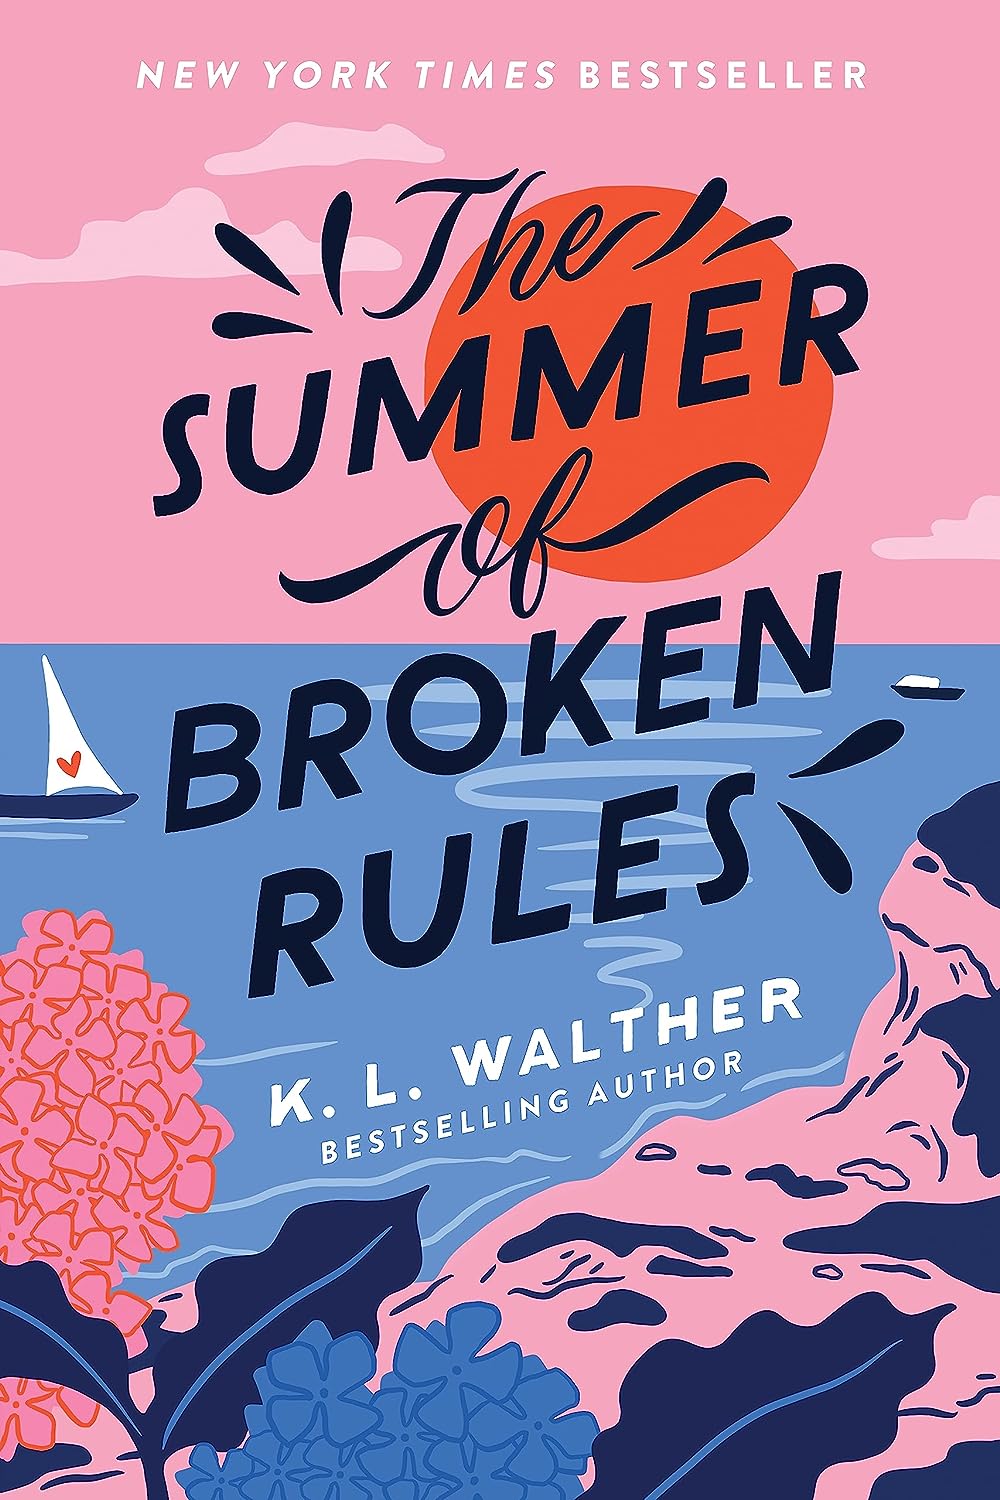 The Summer of Broken Rules: Walther, K. L.: Books review